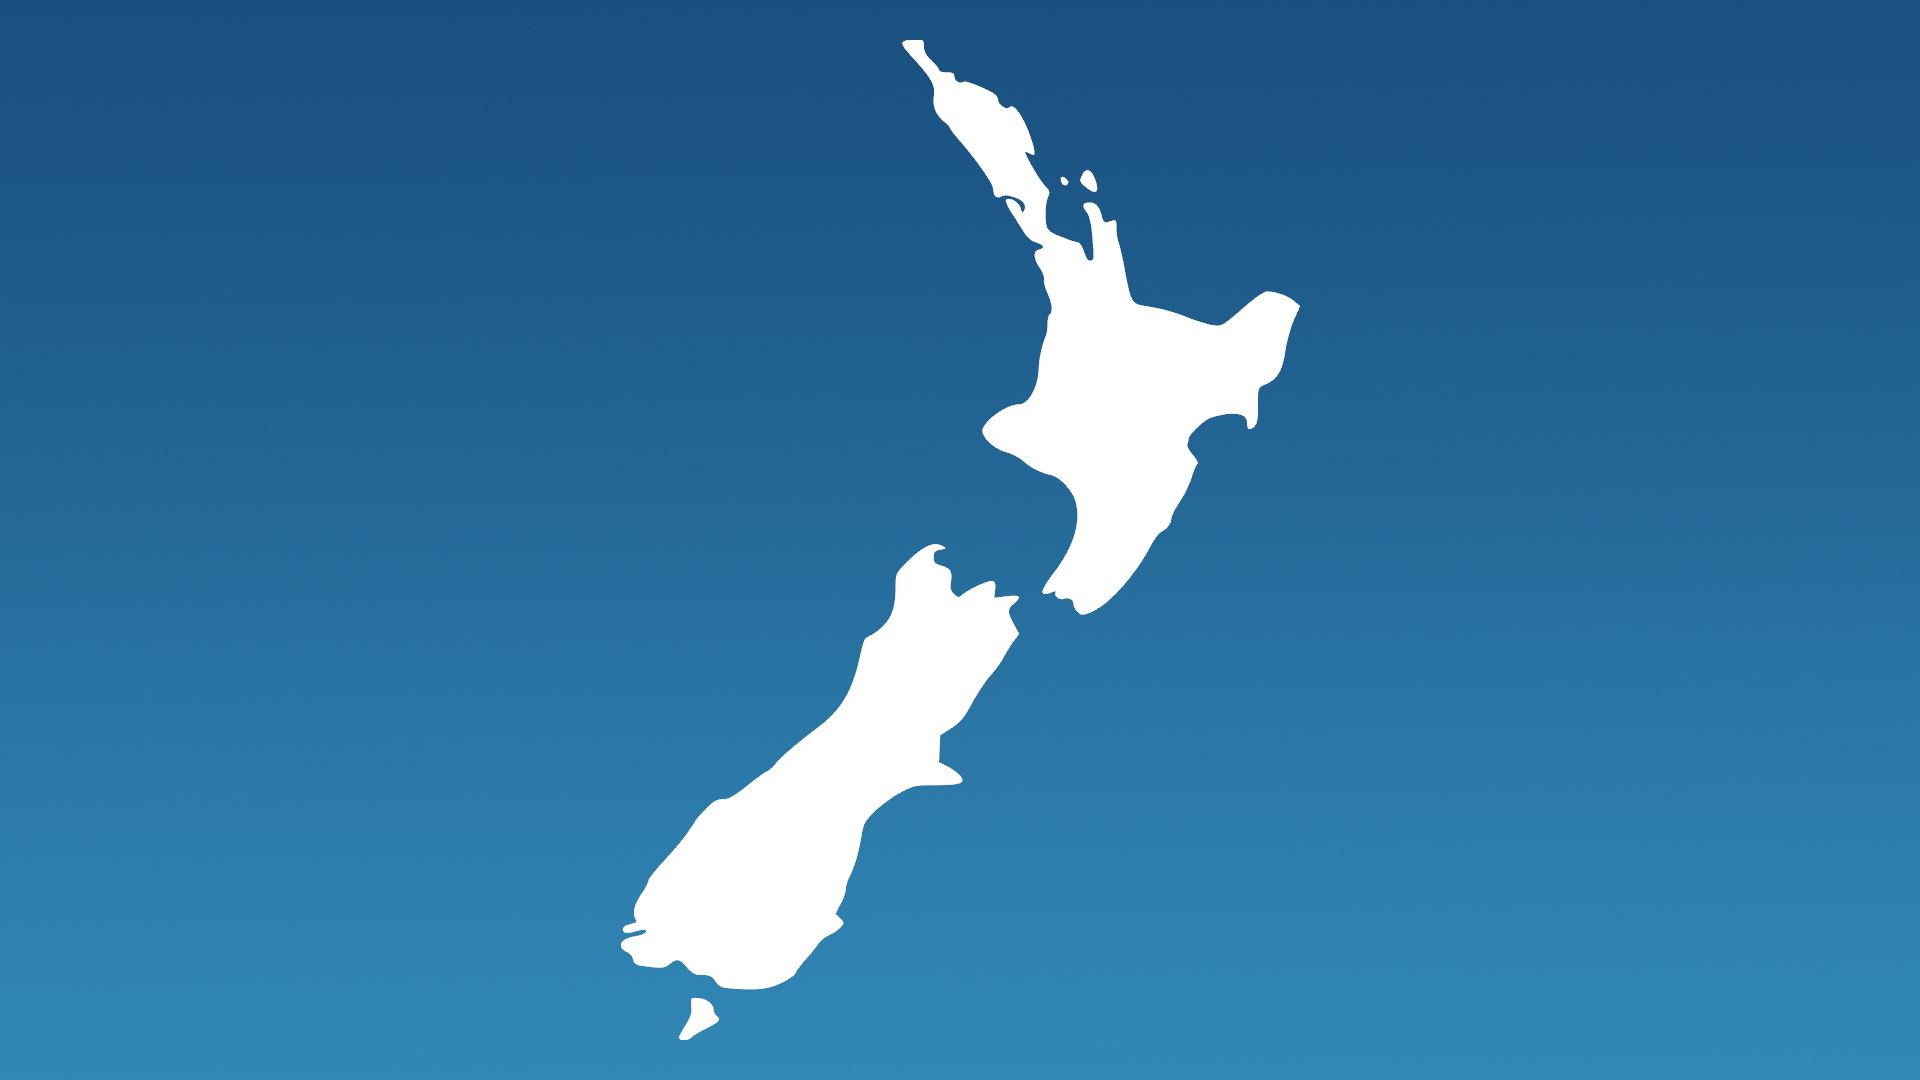 New Zealand: vaping, retail and public health